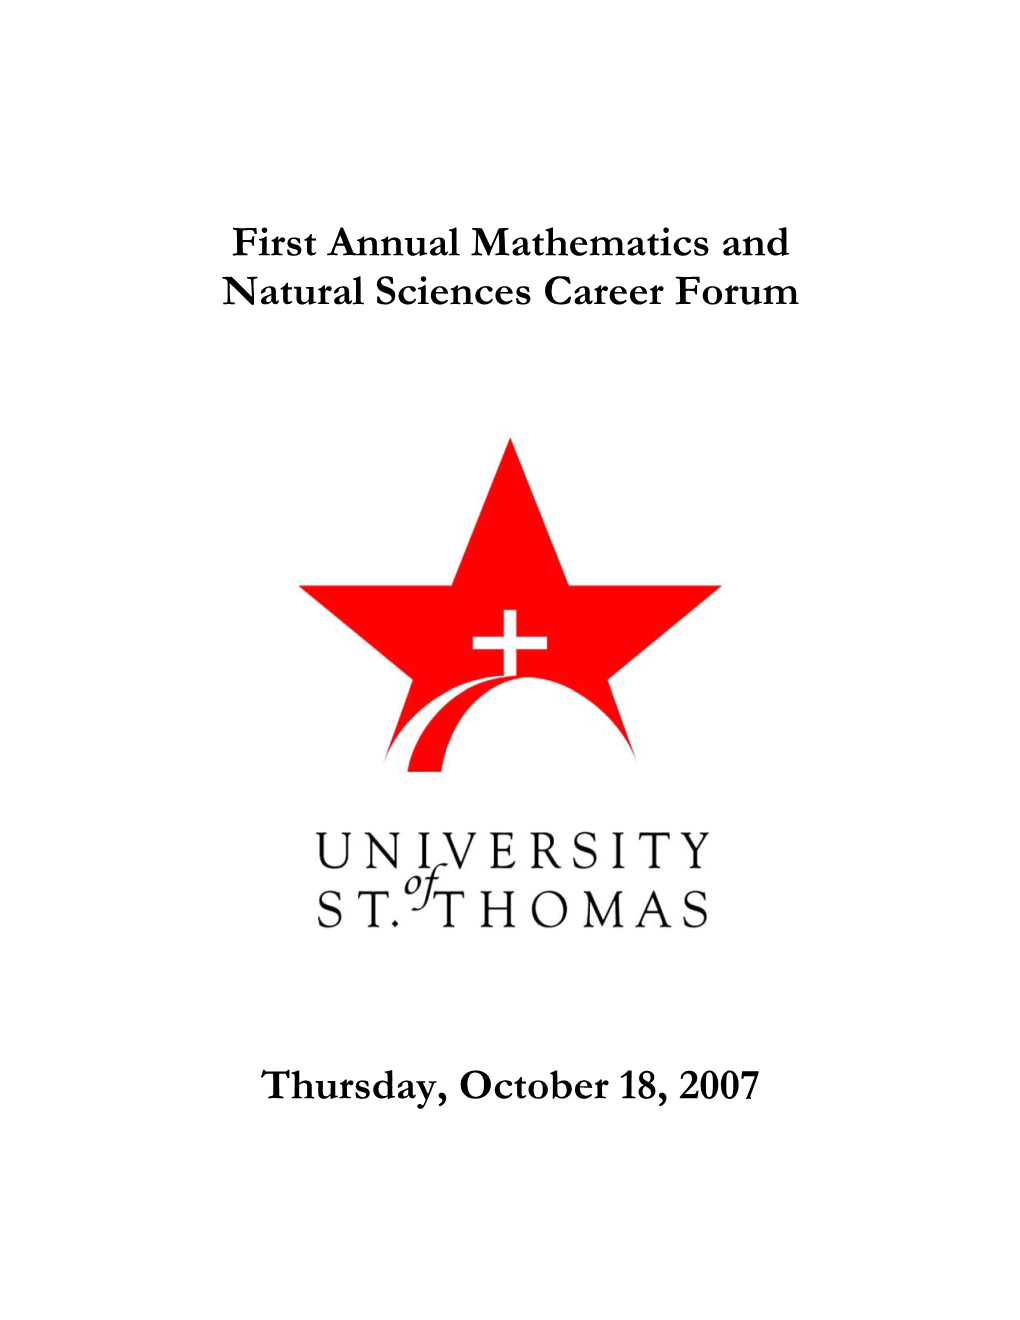 First Annual Mathematics and Natural Sciences Career Forum